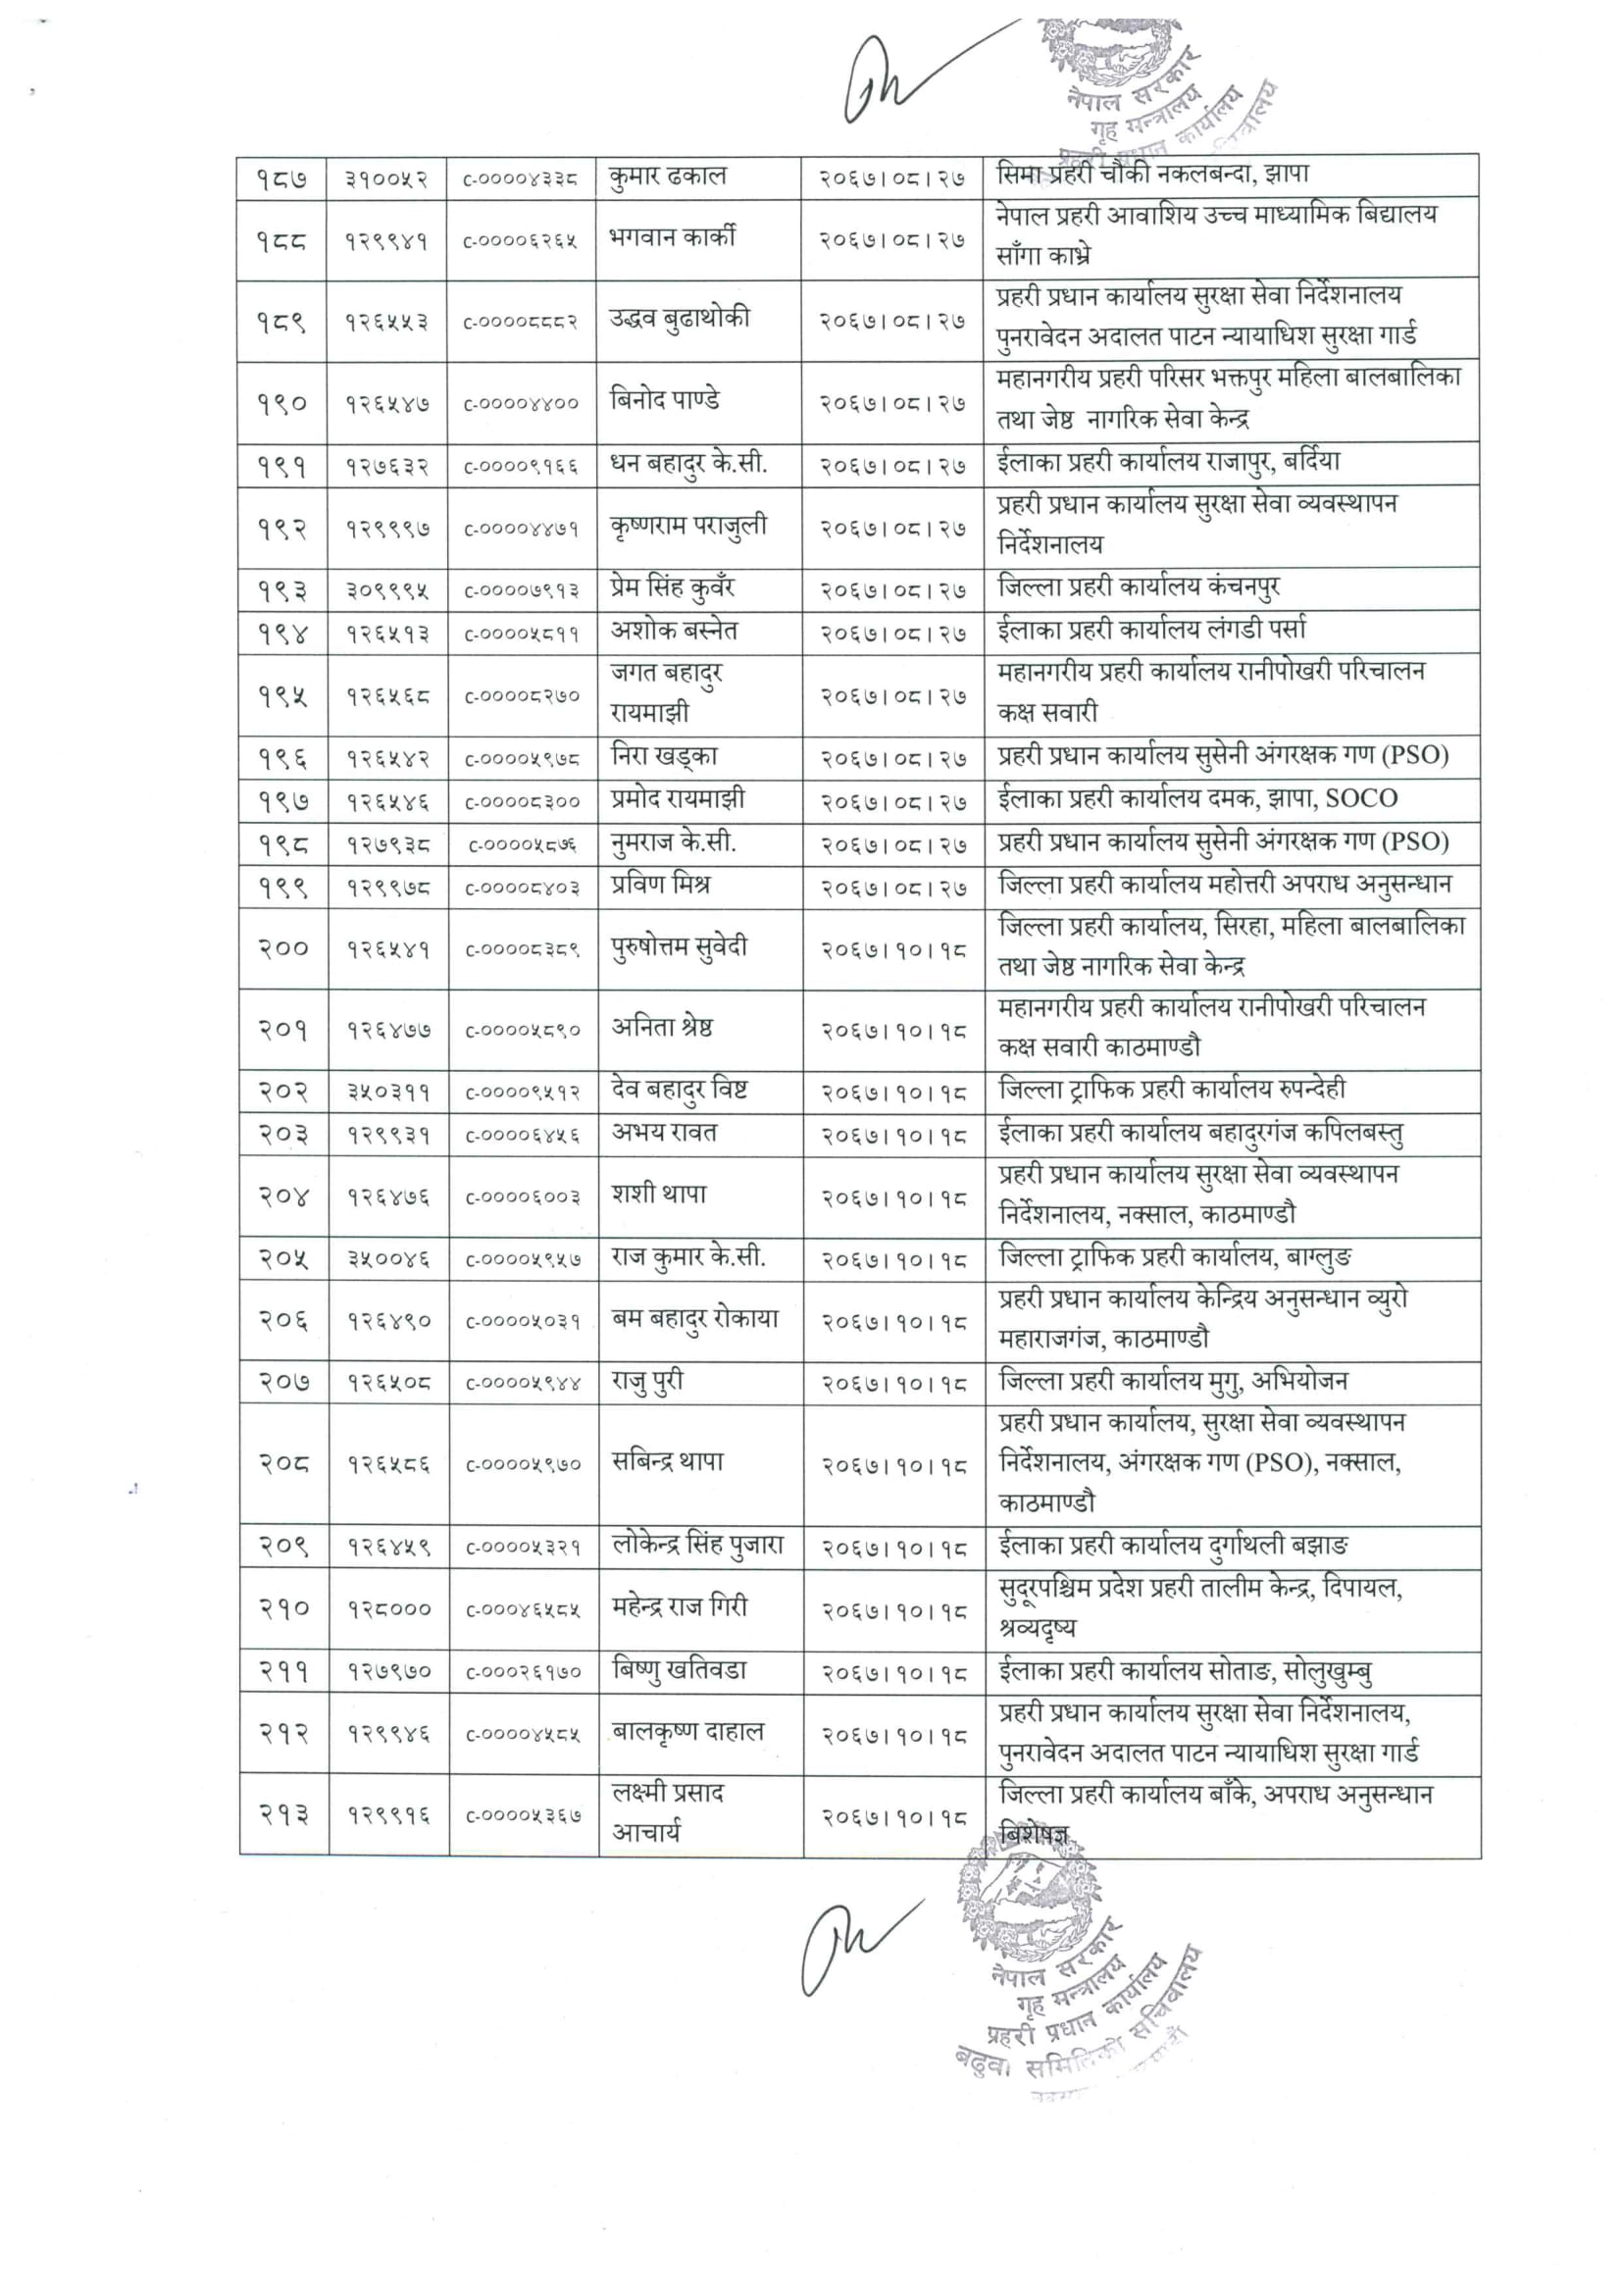 Nepal Police Promotion Recommend List for Senior Sub-Inspector (SSI)